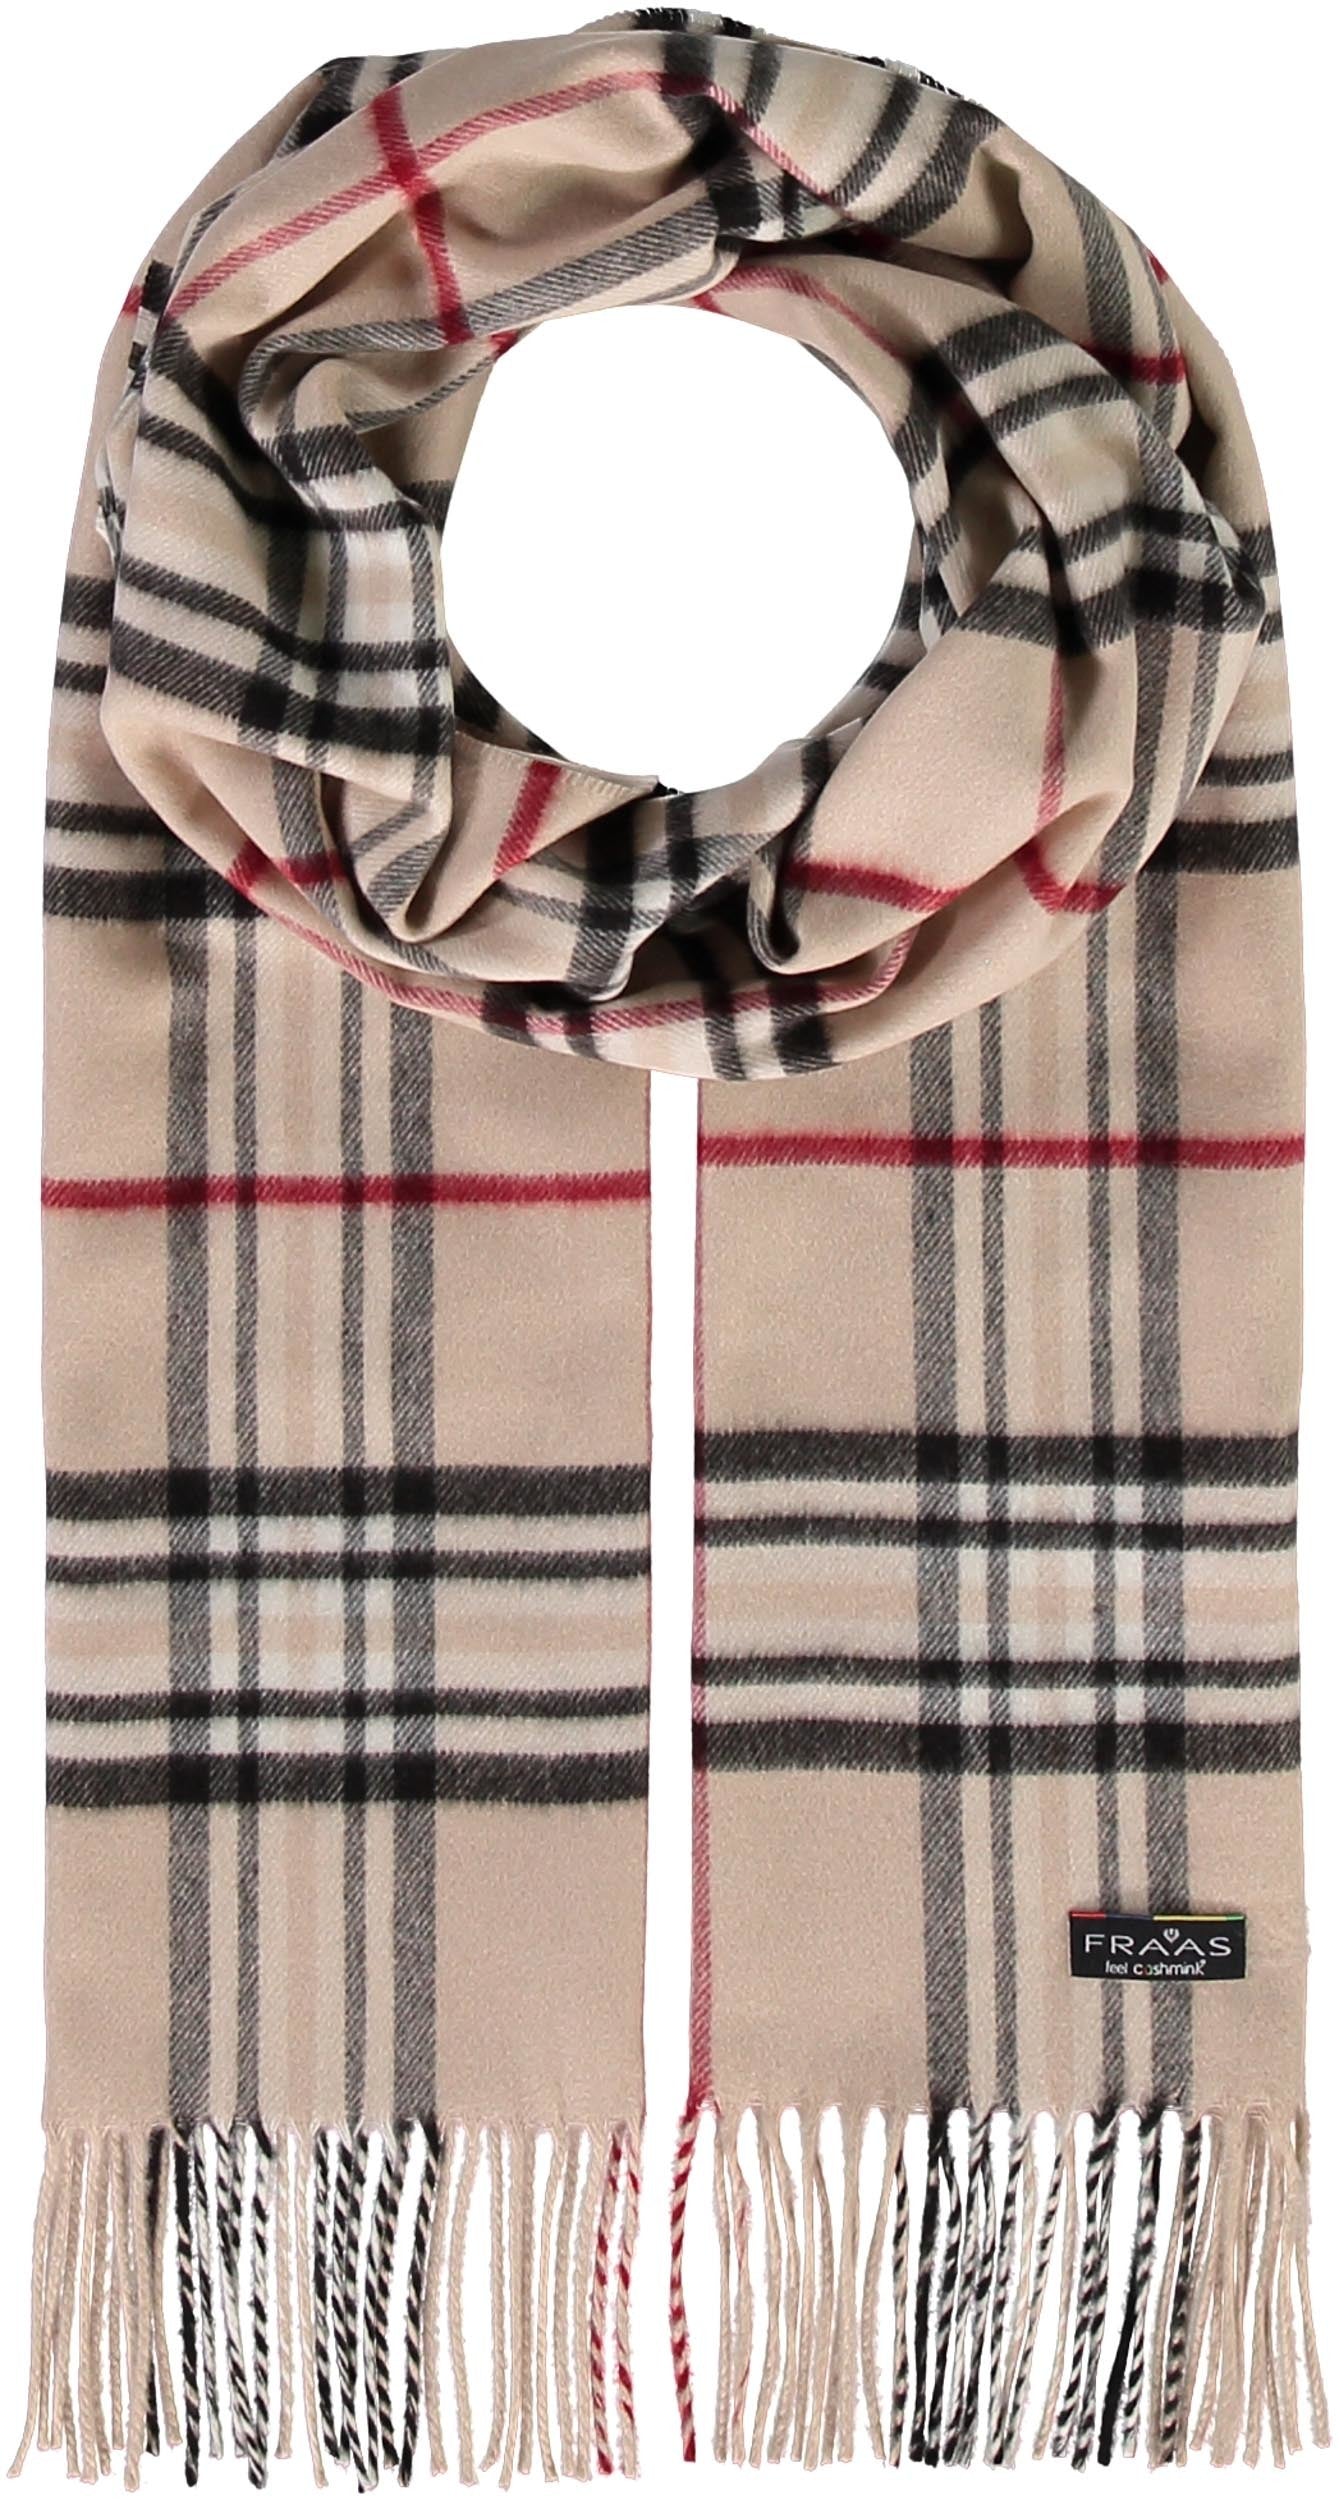 Plaid check in beige by Fraas